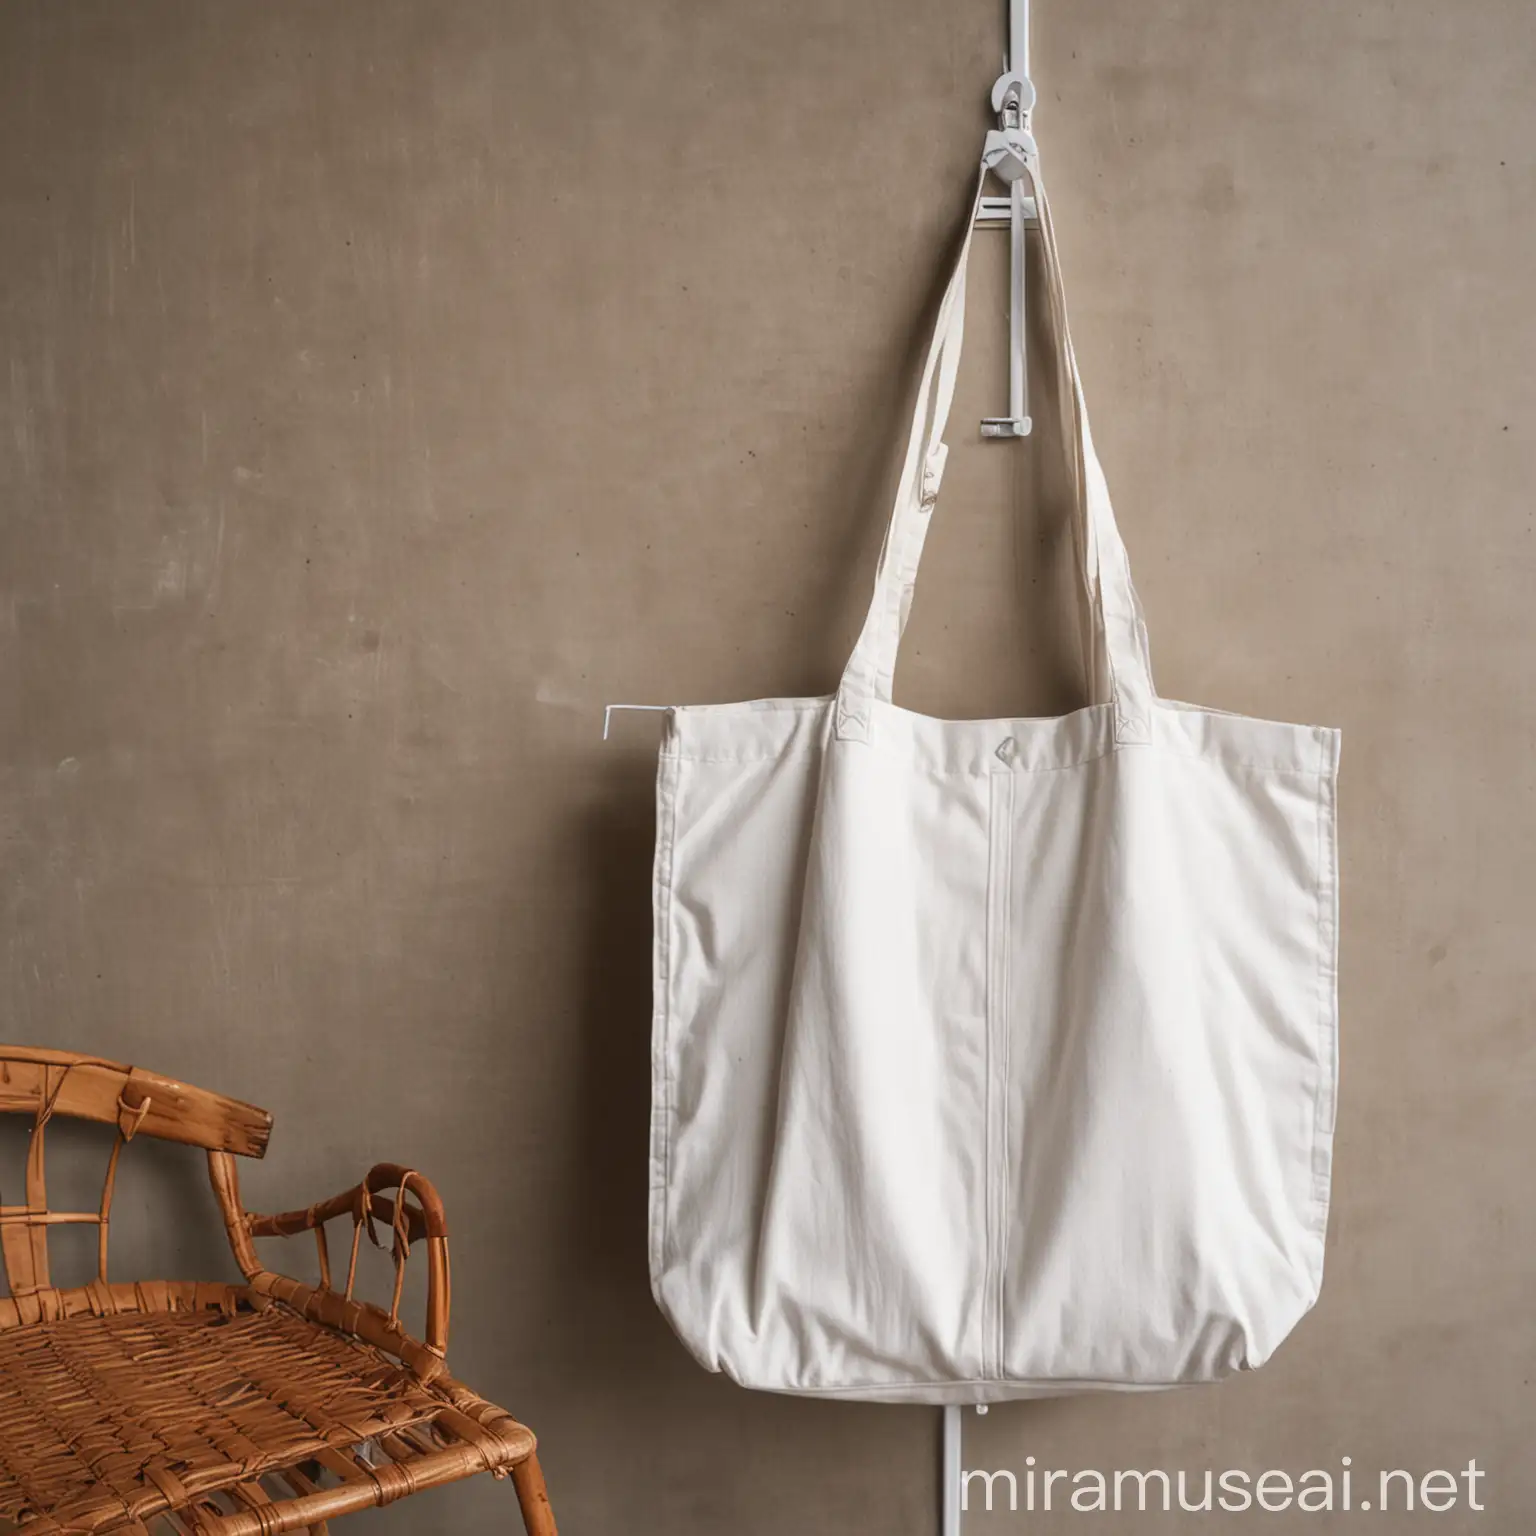 White Tote Bag Hanging from Clothes Hanger in a Caf